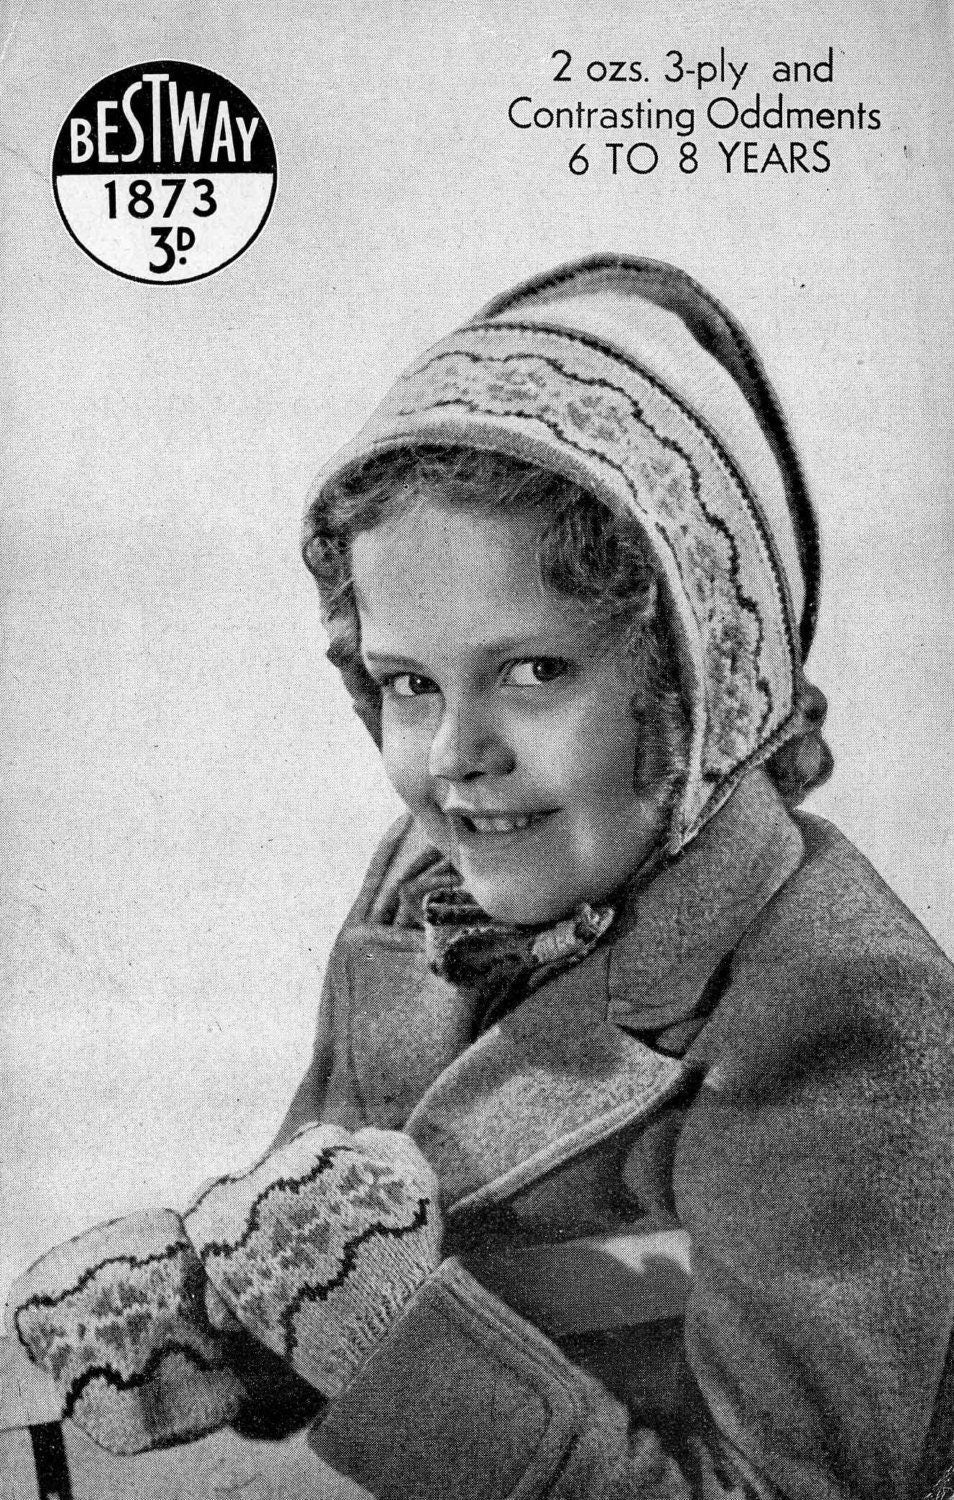 Children's Mitts and Bonnet, 6-8years, 3ply, 50s Knitting Pattern, Bestway 1873